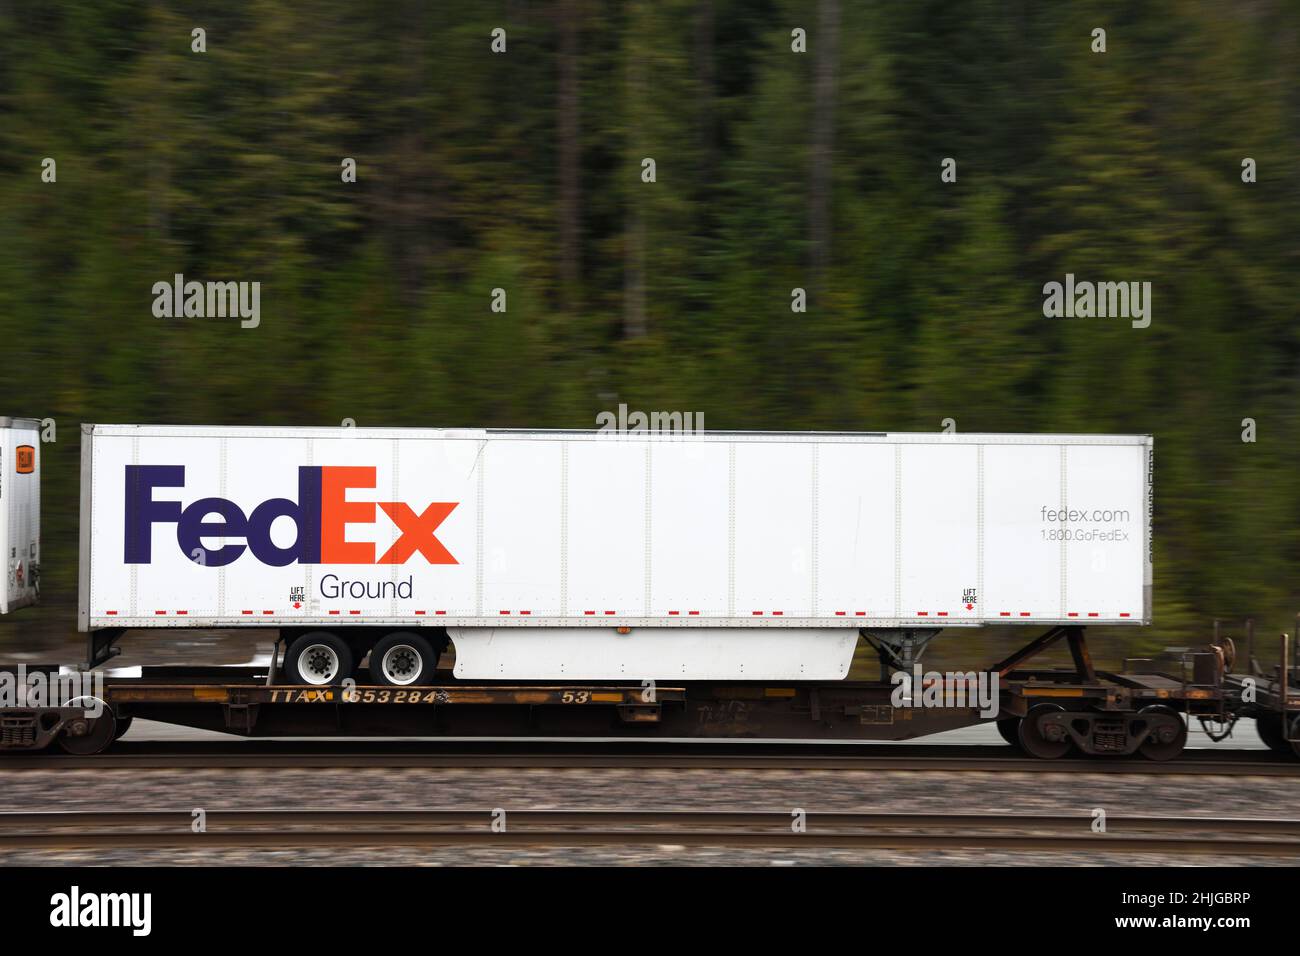 A Fedex intermodal shipping container on the BNSF railway along their Northern Transcon route running from Seattle to Chicago. Near Troy, Montana. Stock Photo